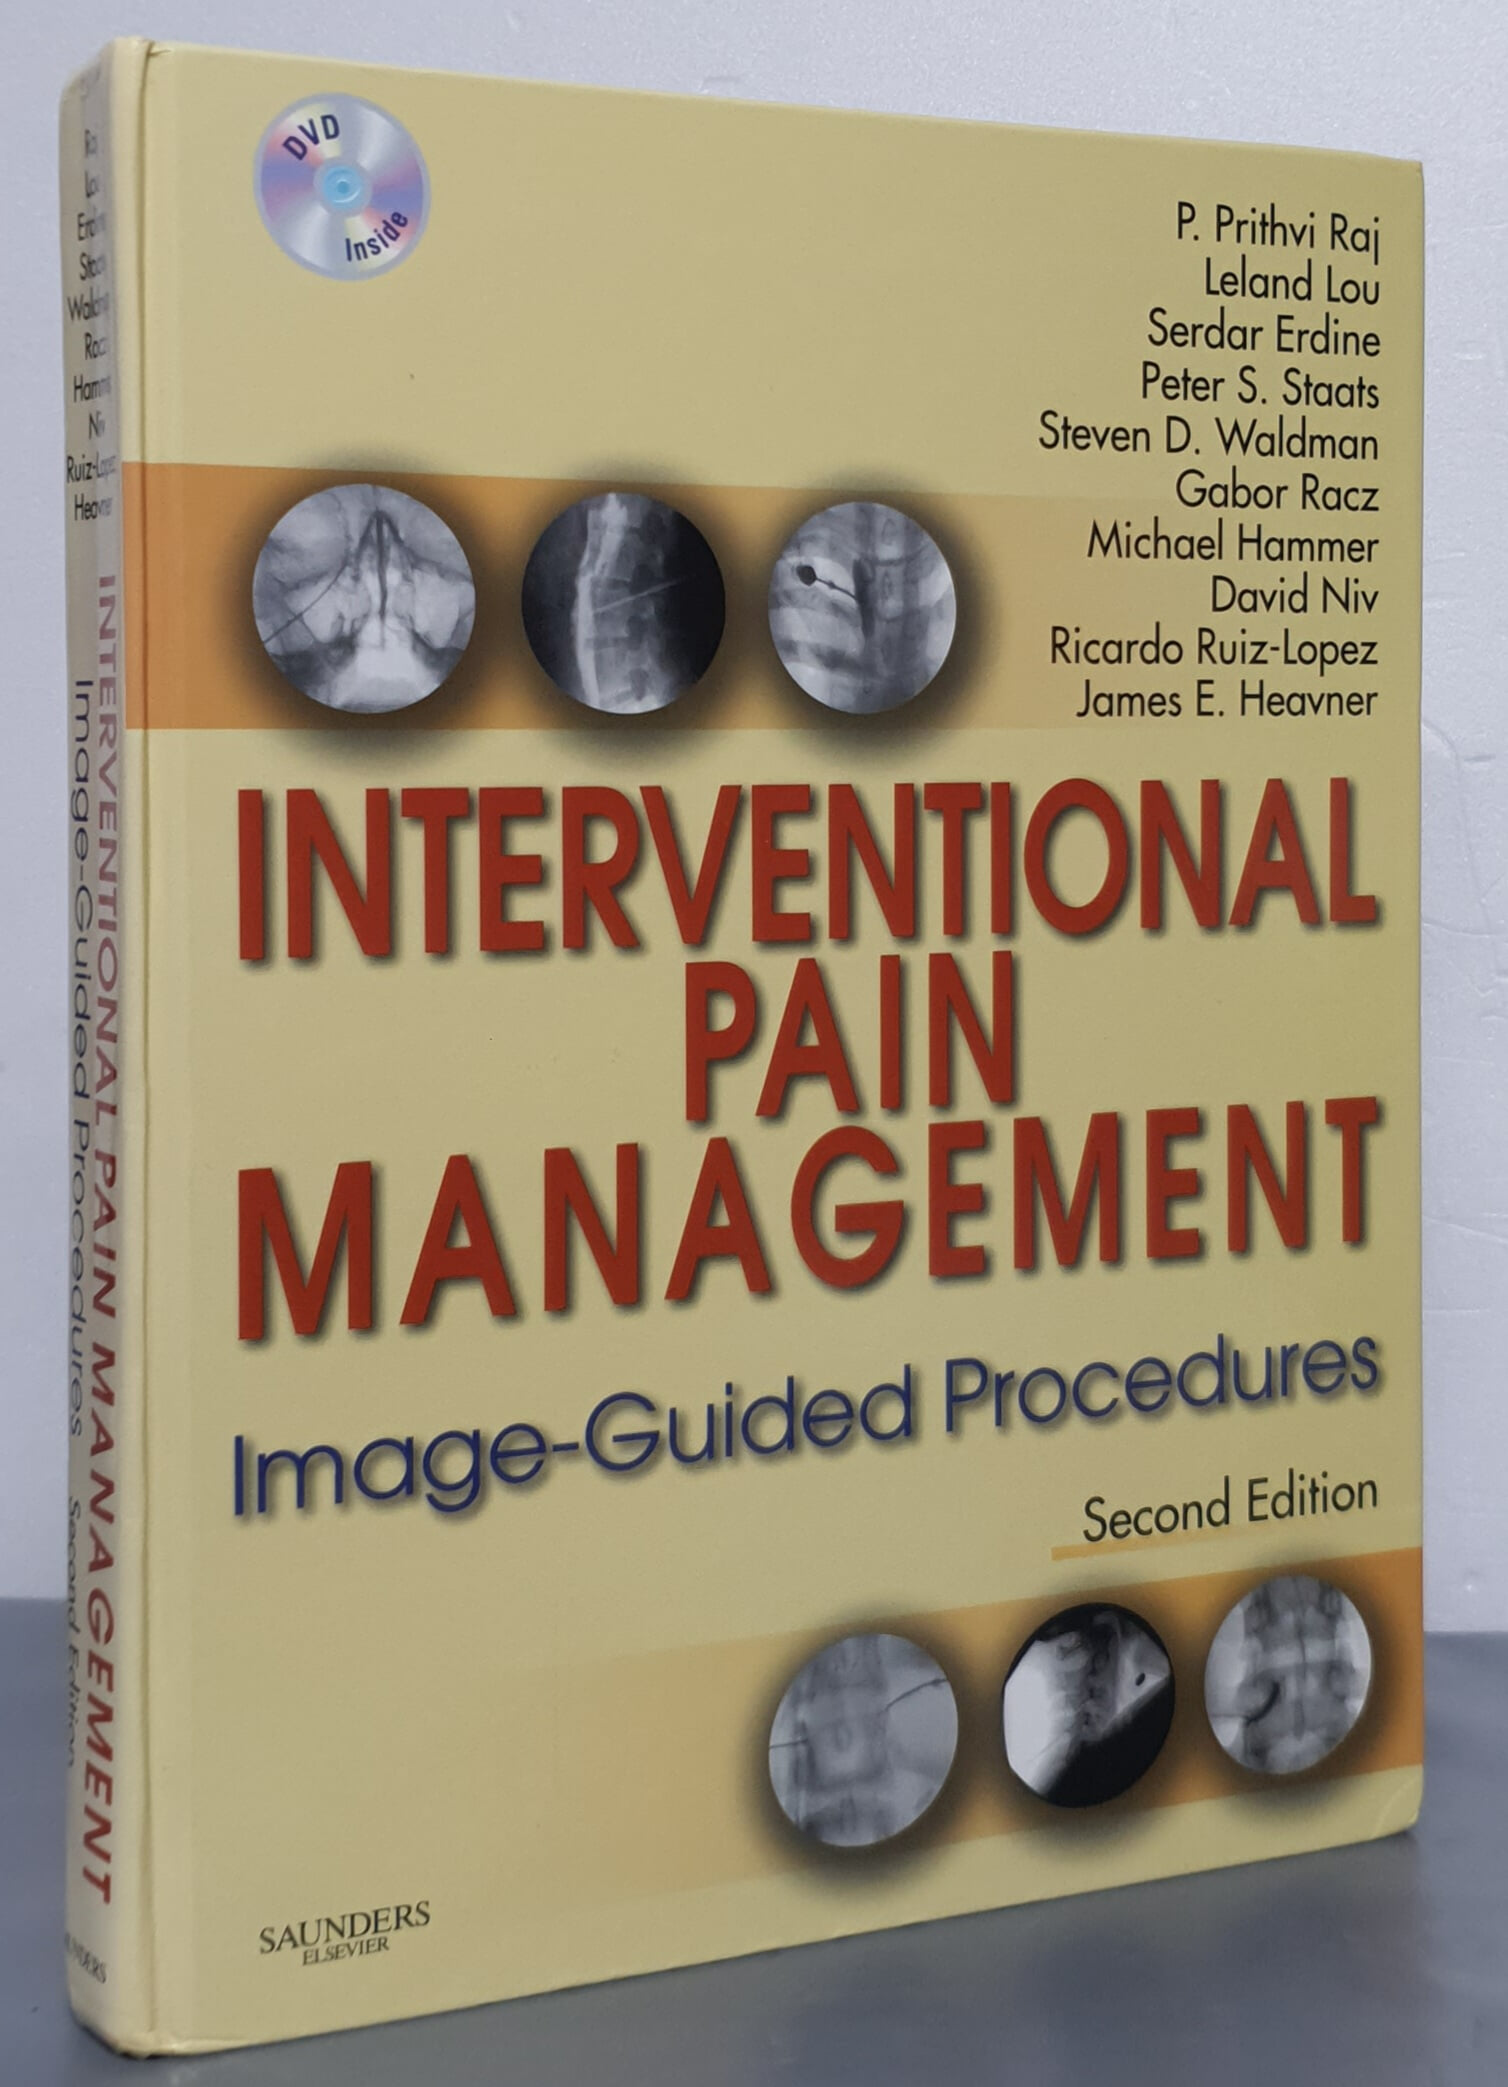 Interventional Pain Management (Hardcover, DVD, 2nd) - Image-Guided Procedures 